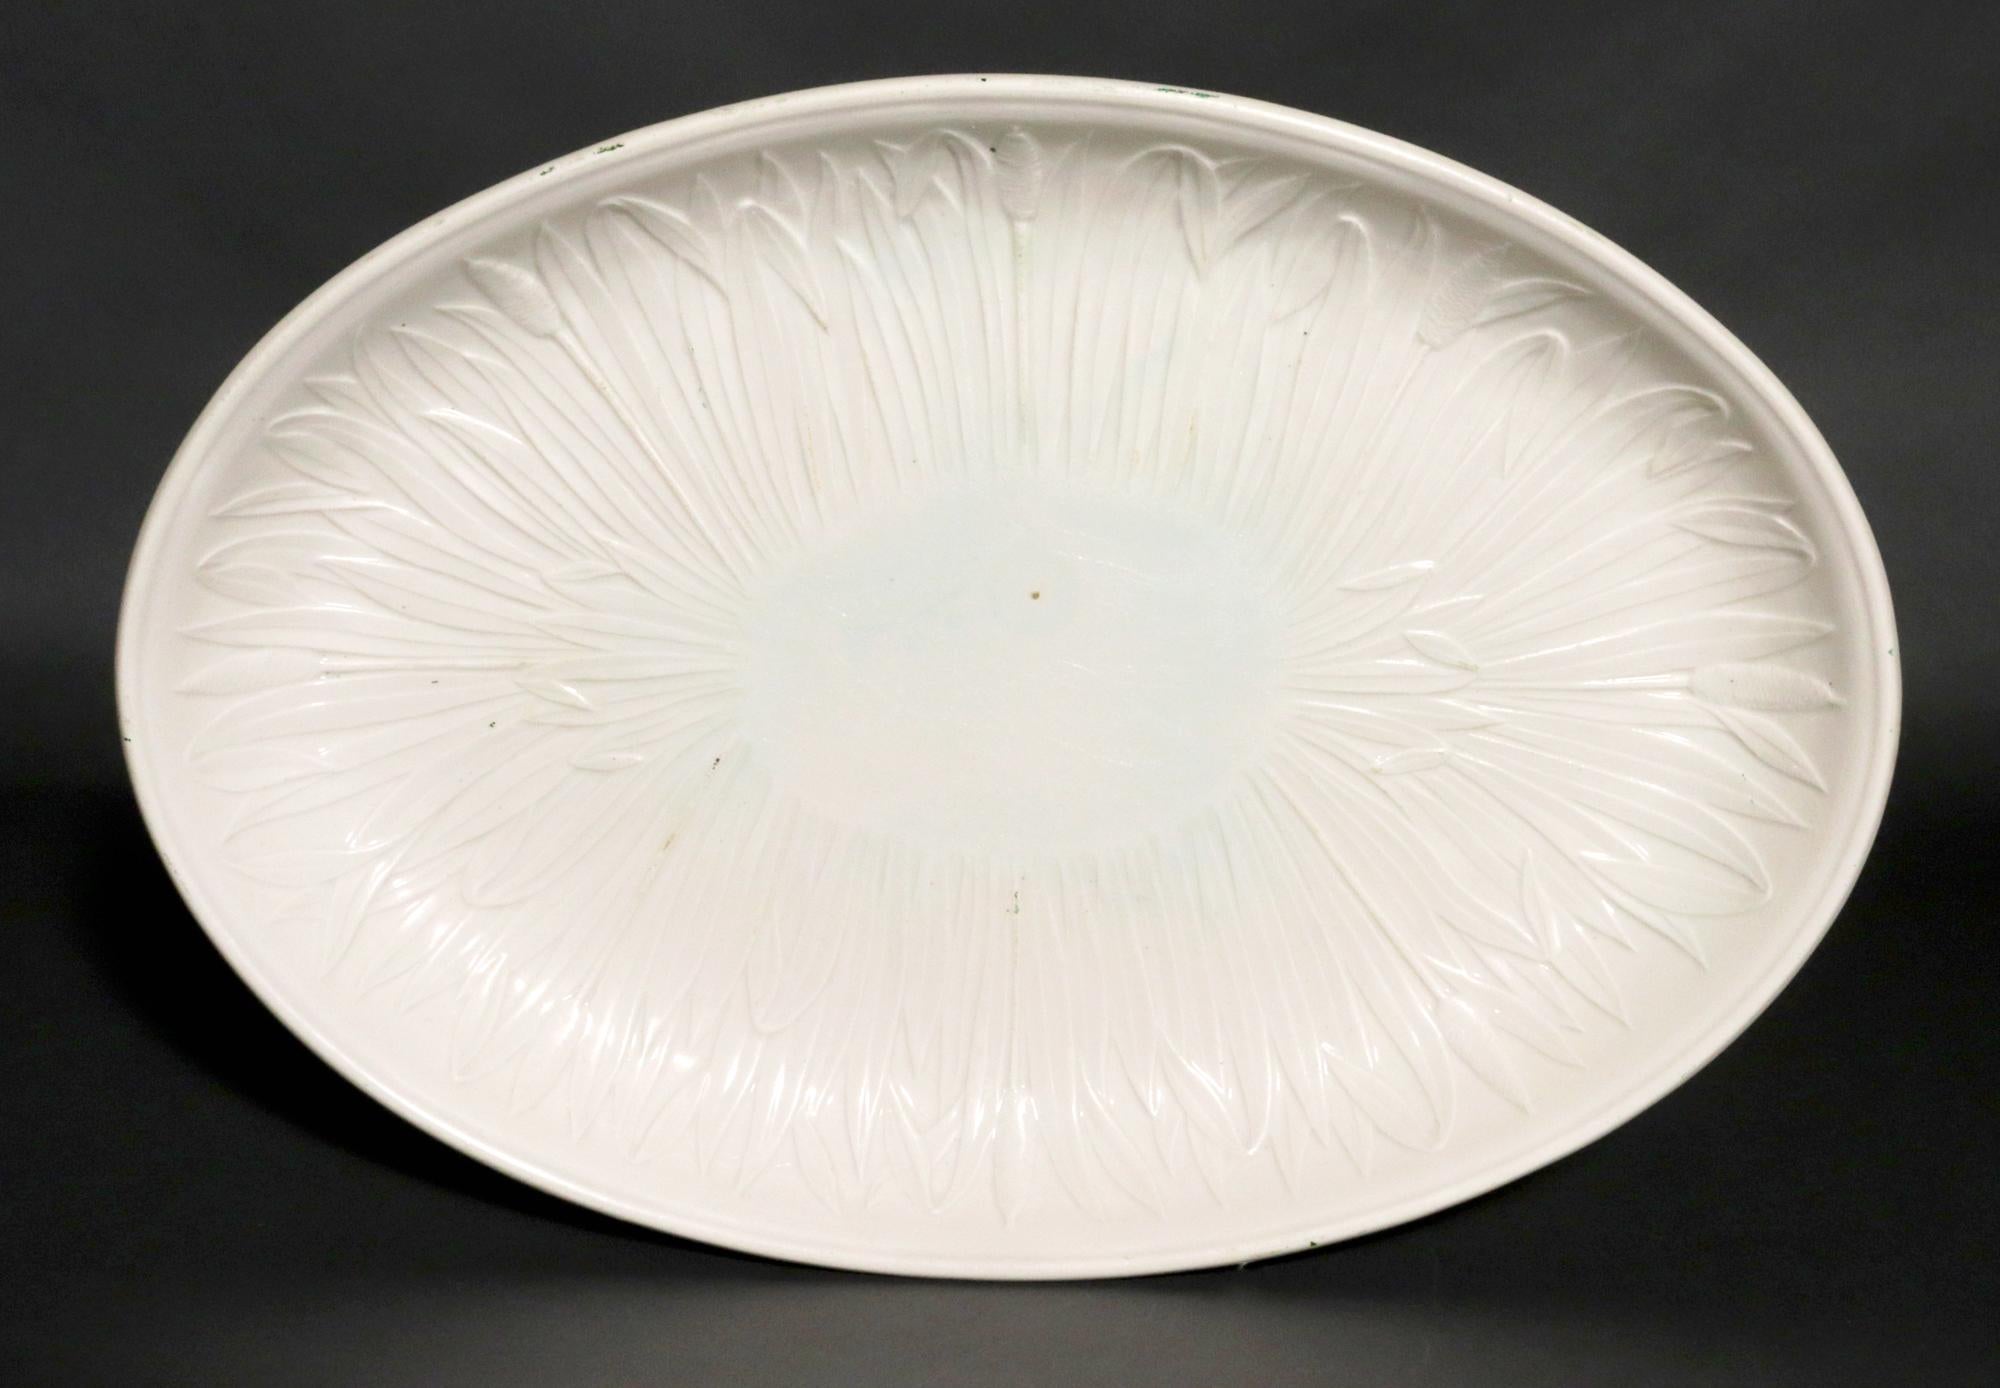 Creil Faience Fine Creamware Dish,
Circa 1800-20

This charming French creamware dish is decorated with a molded design of bullrushes encircling the dish. The crisp design displays beautifully against the creamy background of the dish. The dish